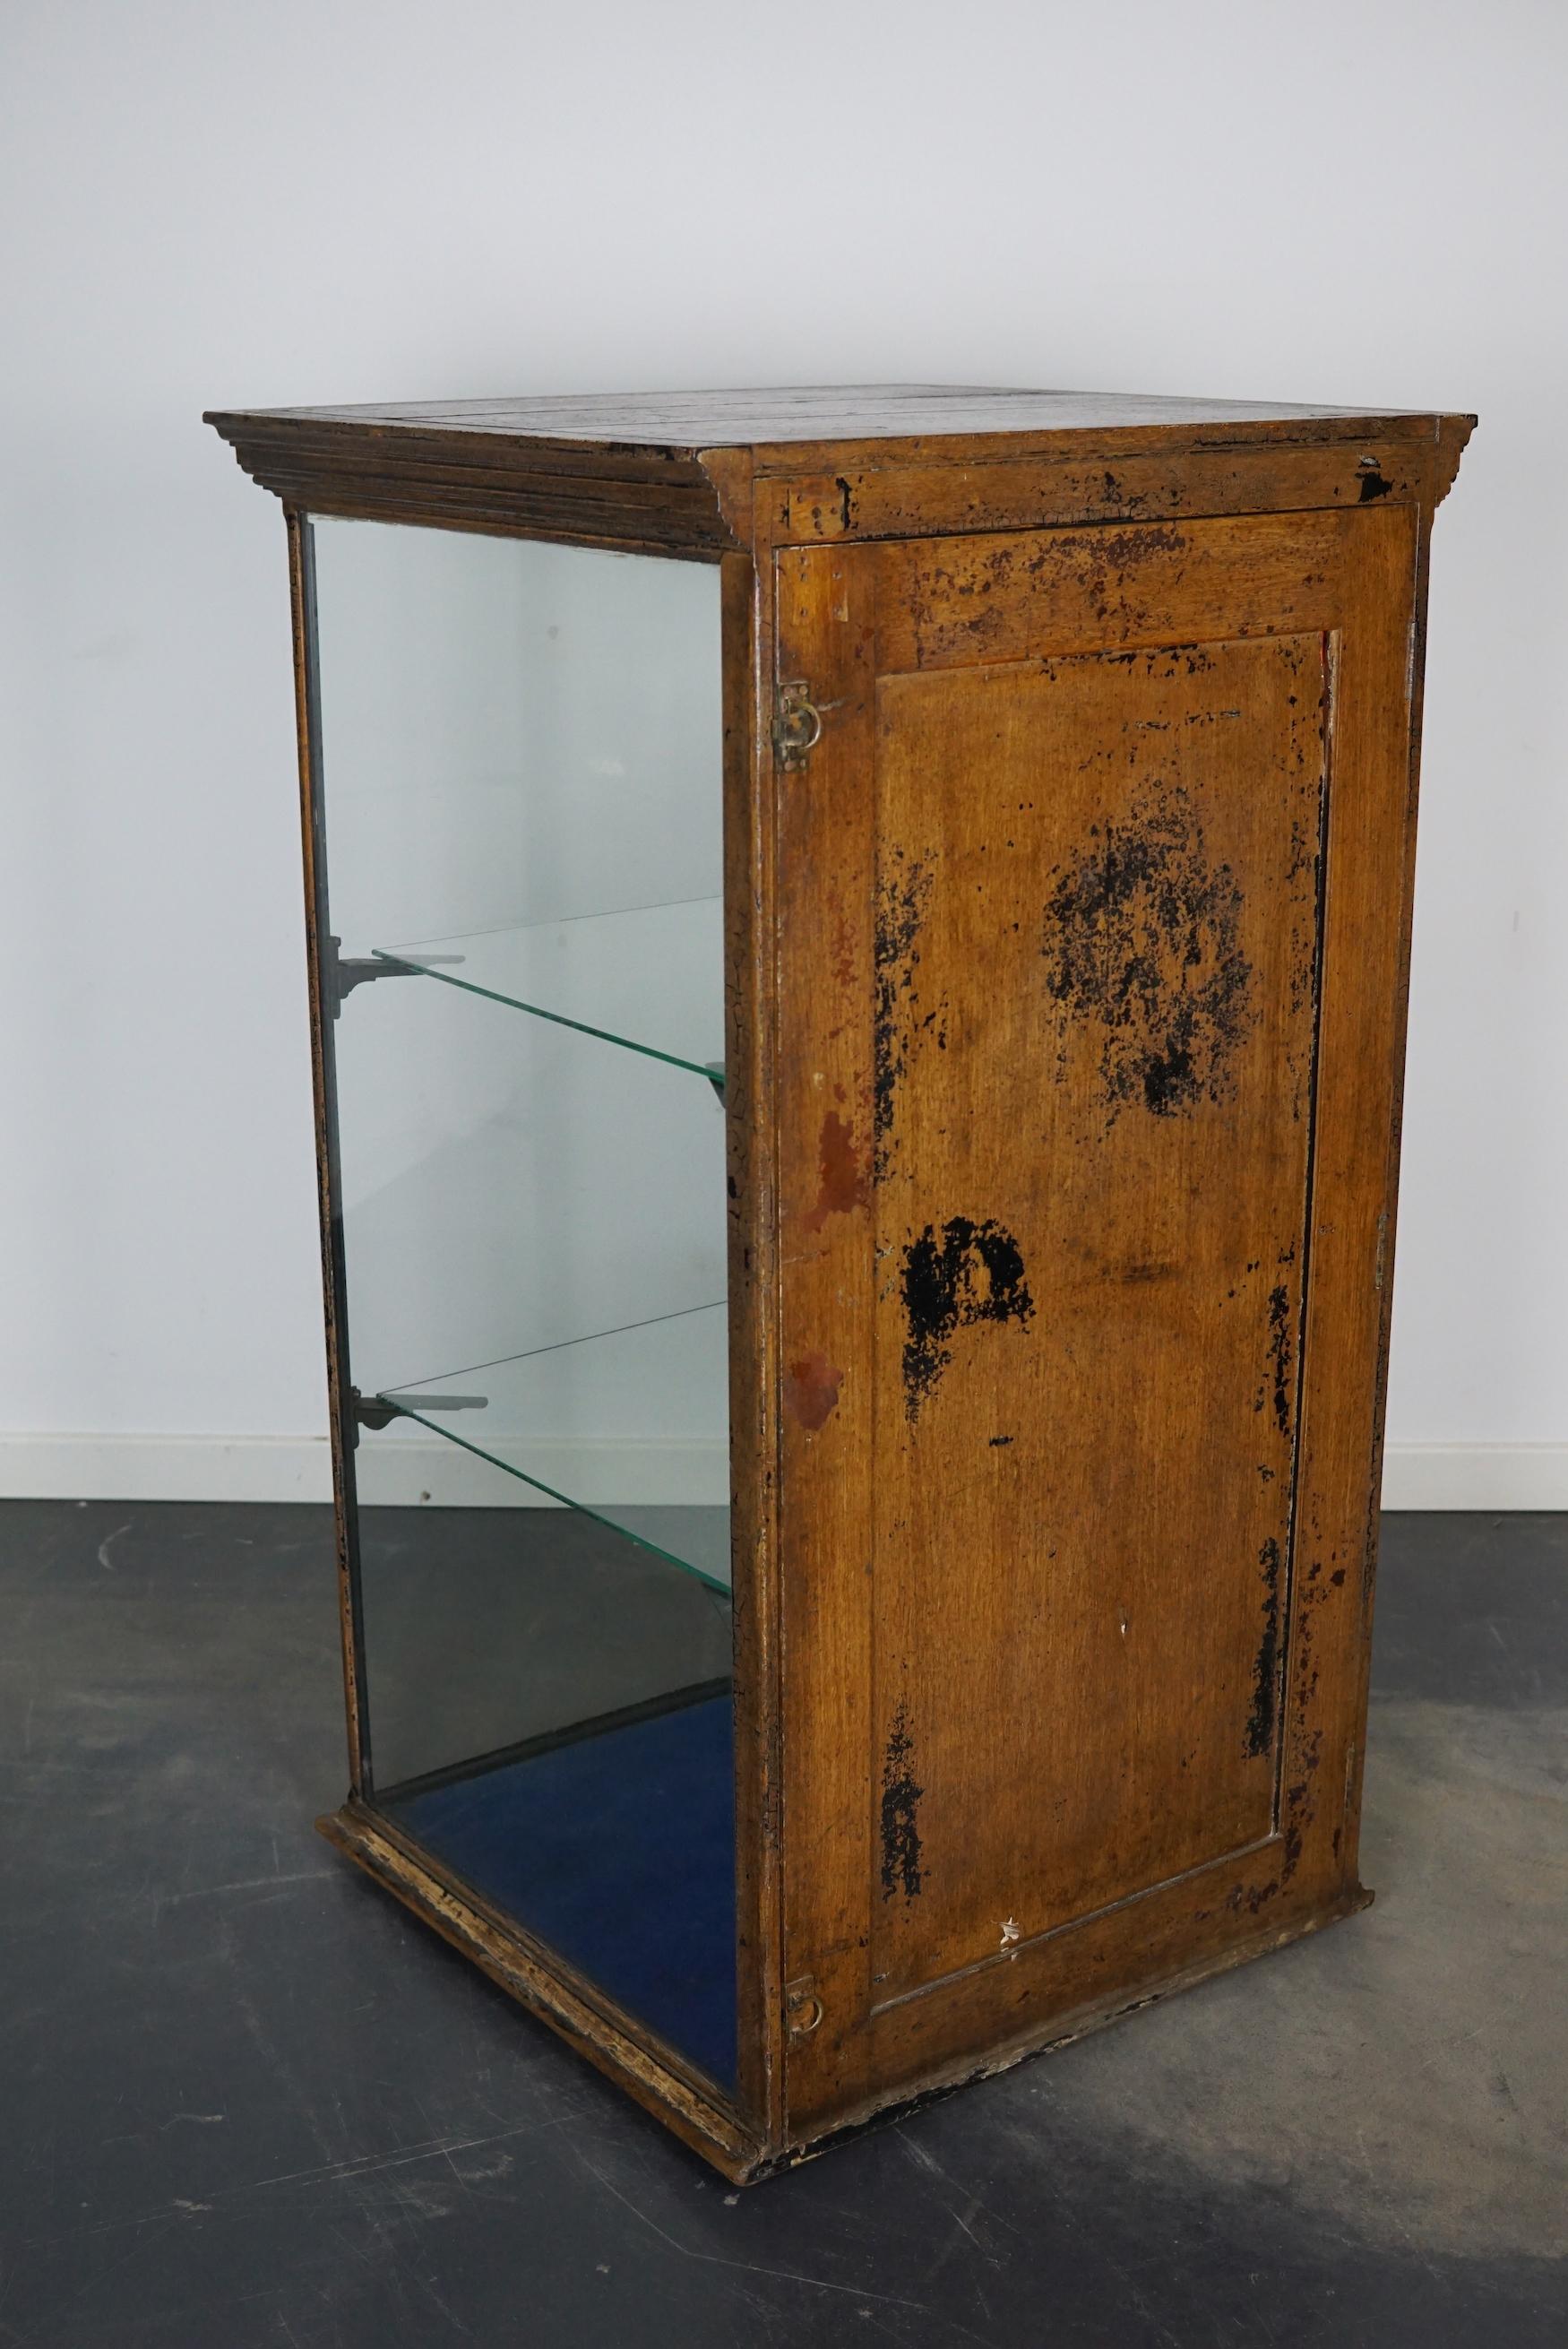 Victorian Painted Mahogany Shop Display Cabinet / Vitrine, Late 19th Century For Sale 6